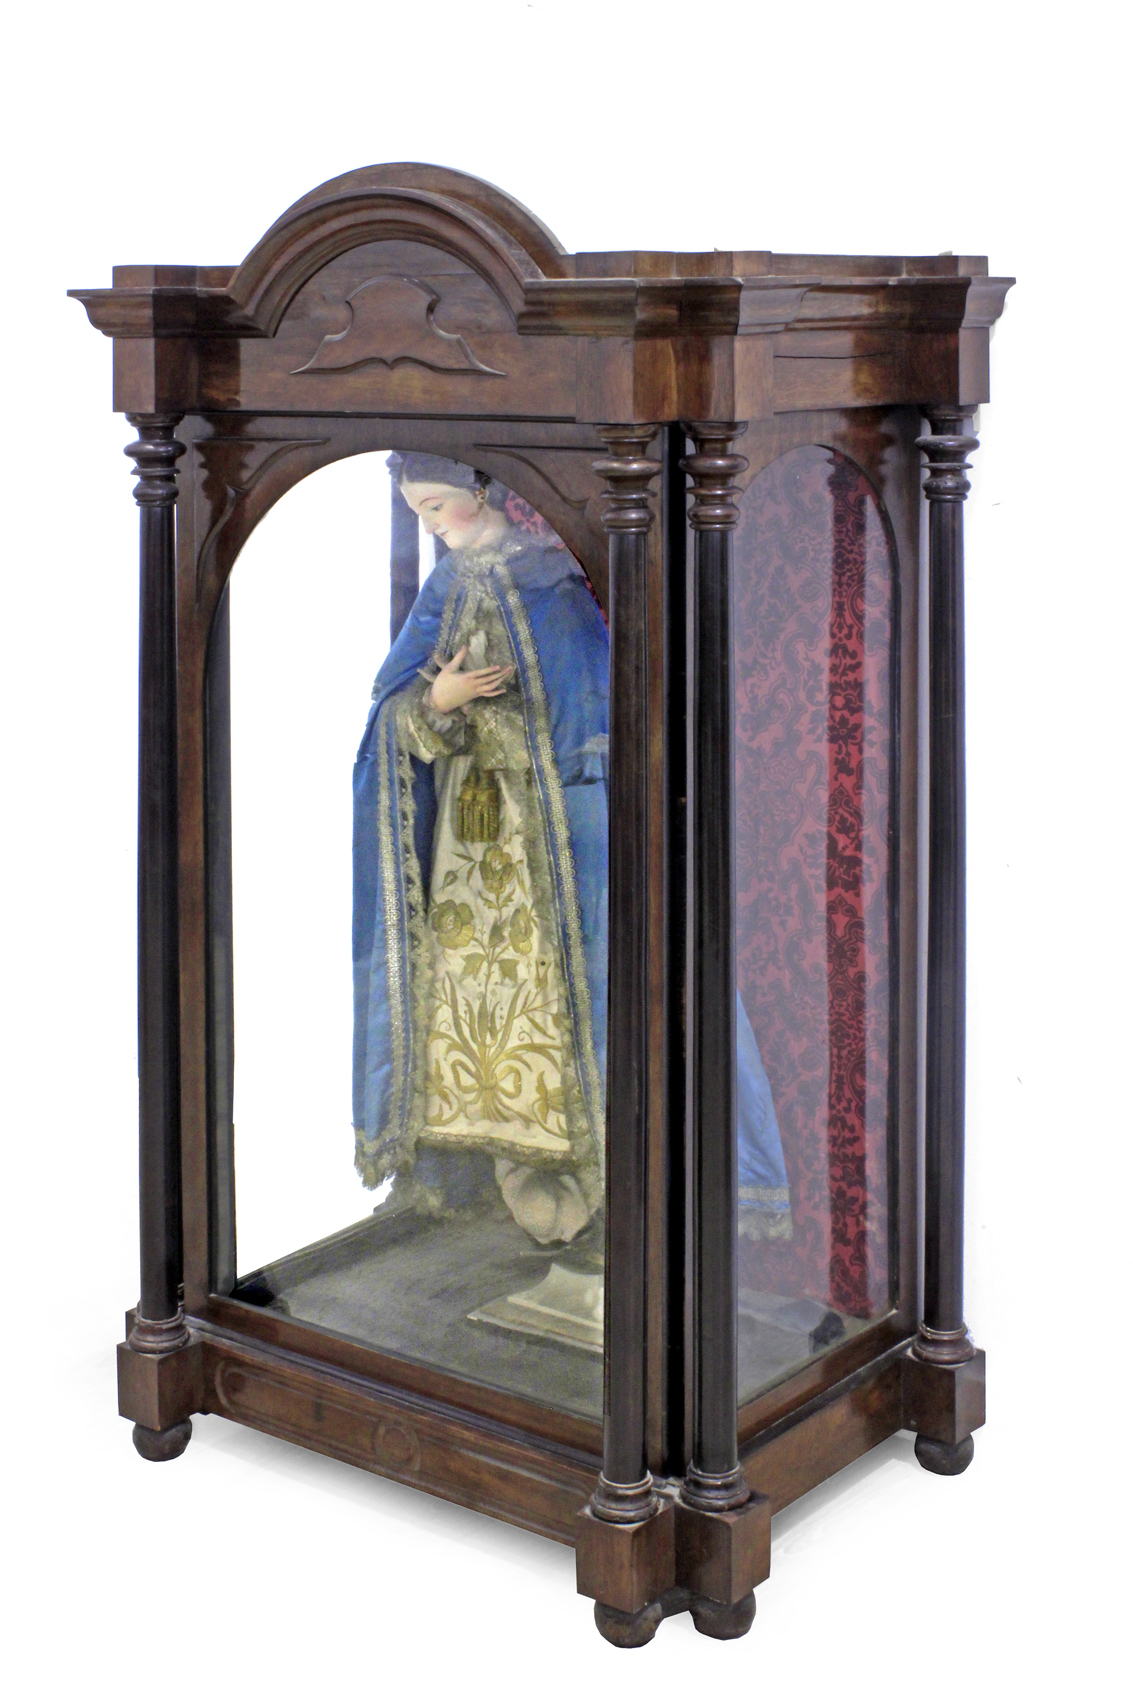 A 19th century Isabelino mahogany glass cabinet with a religious santos cage doll of the Virgin